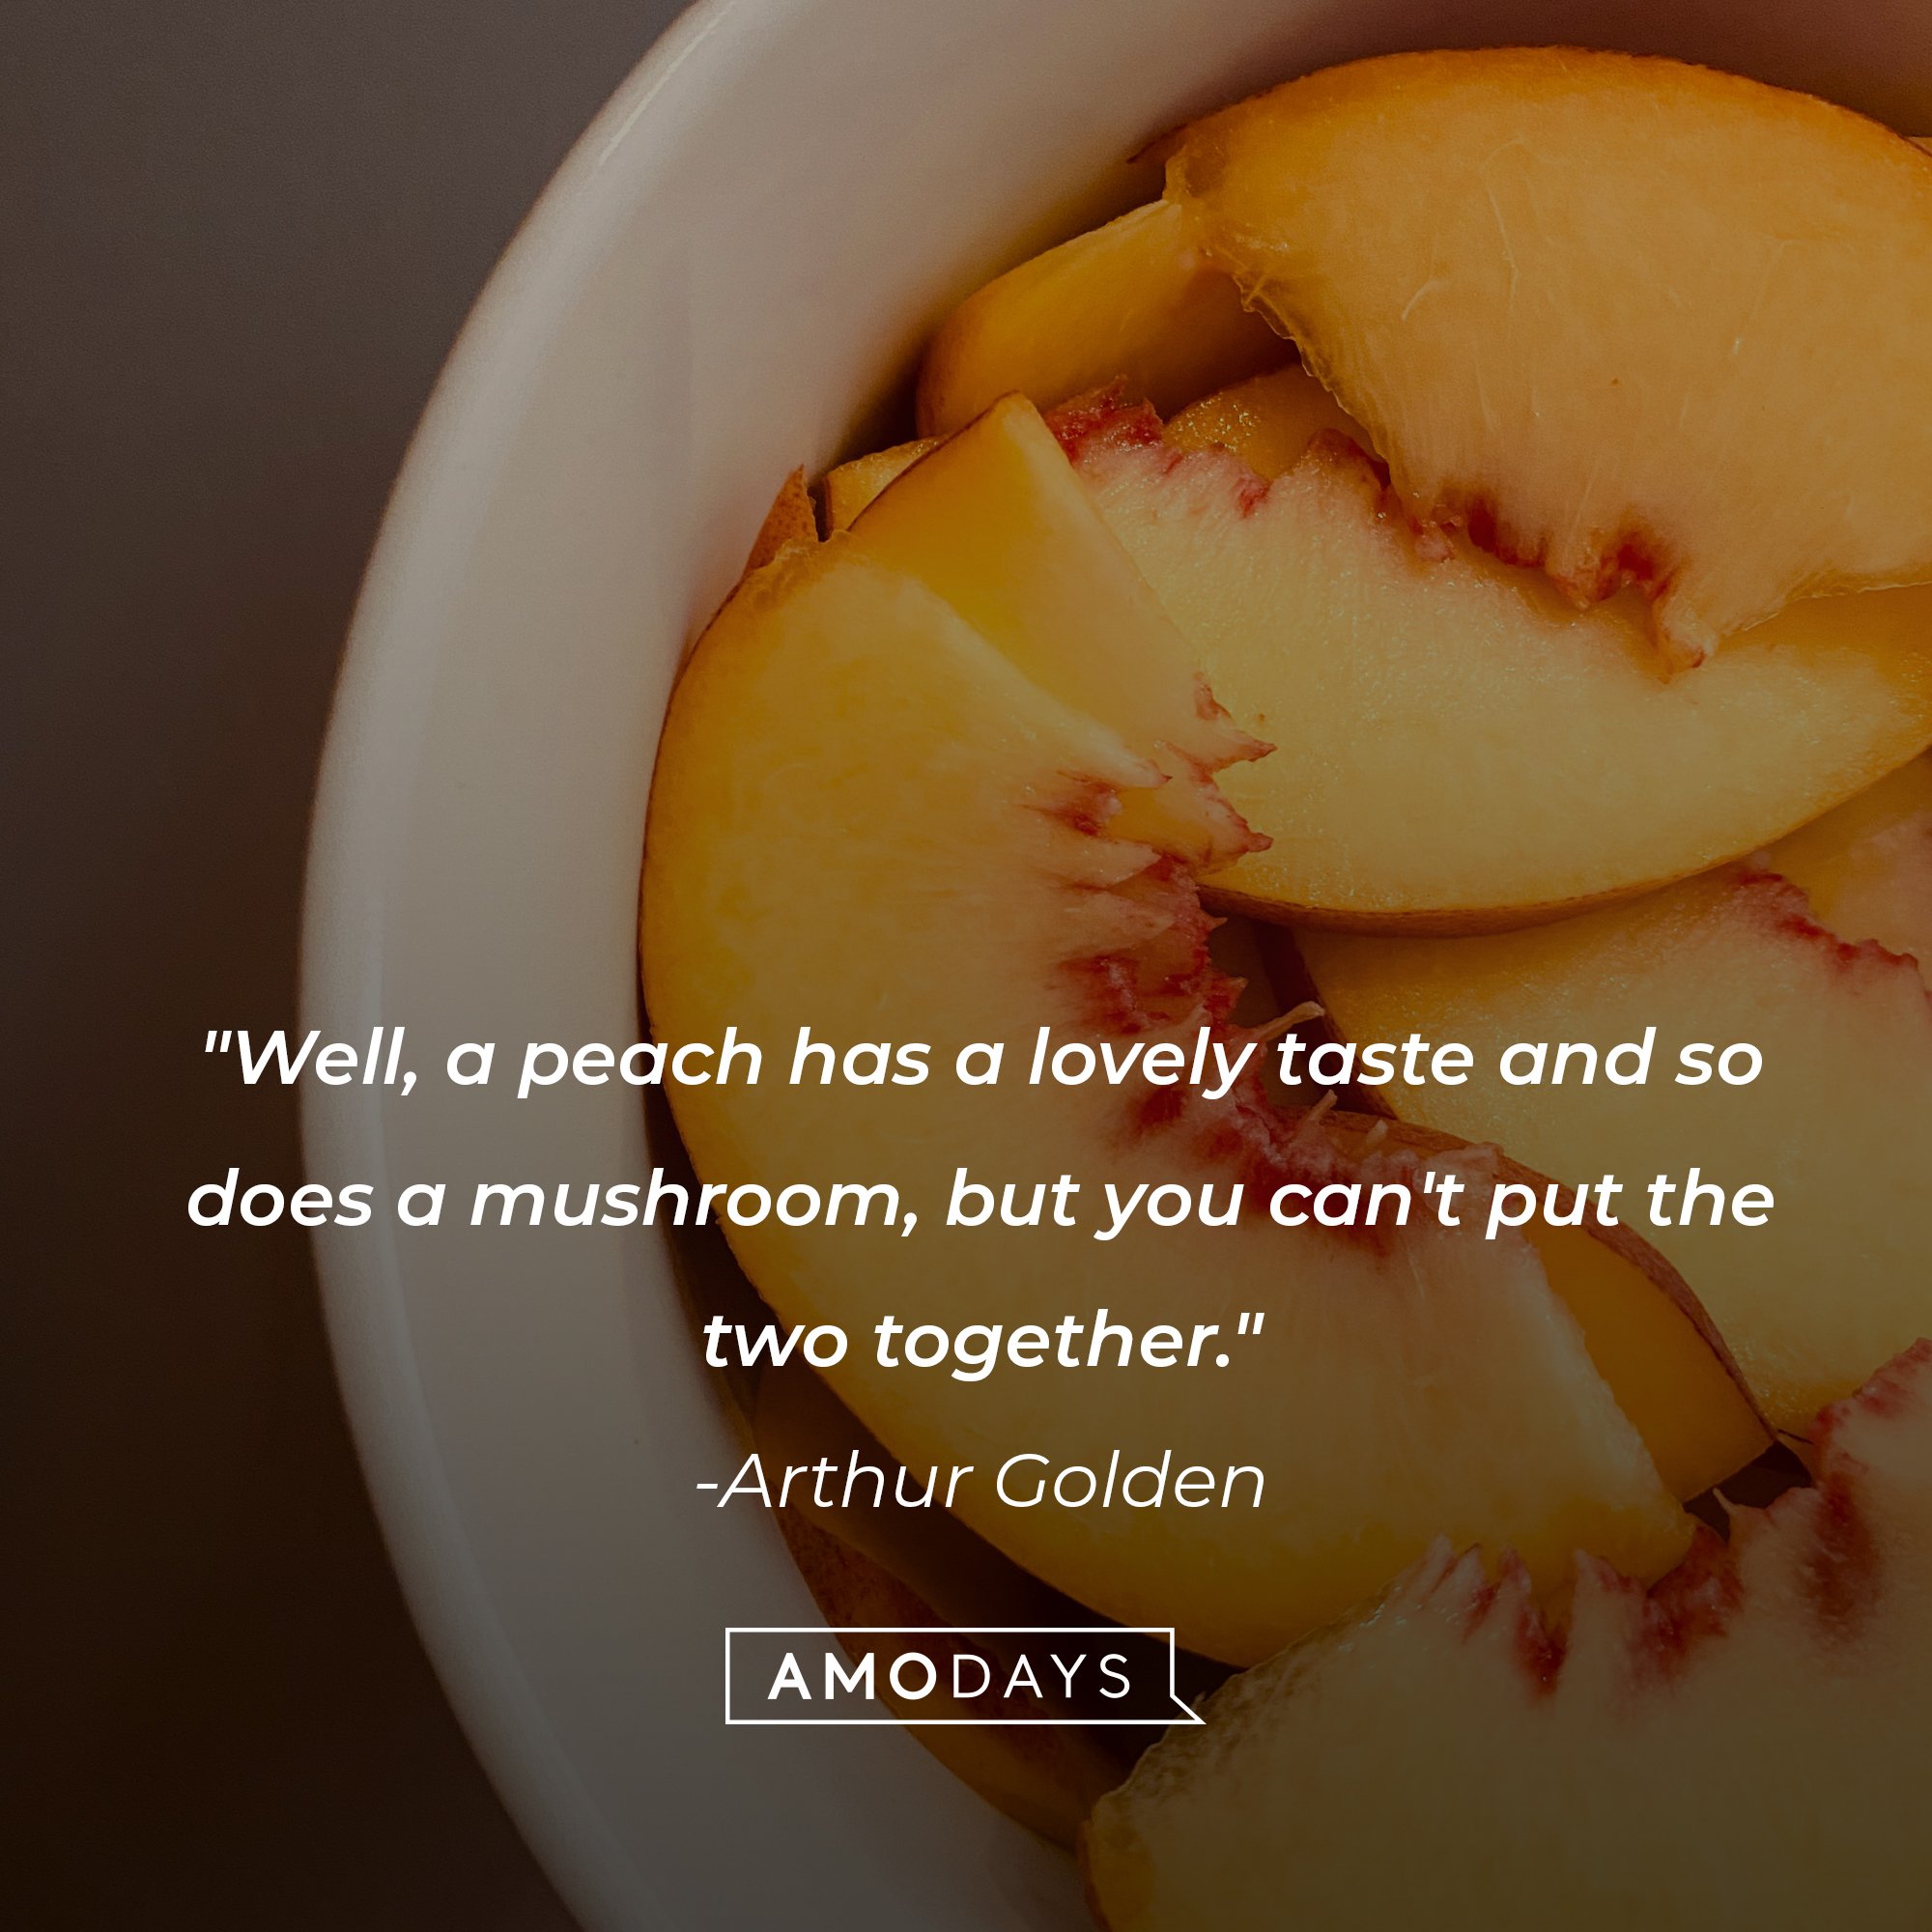 Arthur Golden's quote: "Well, a peach has a lovely taste and so does a mushroom, but you can't put the two together." | Image: AmoDays